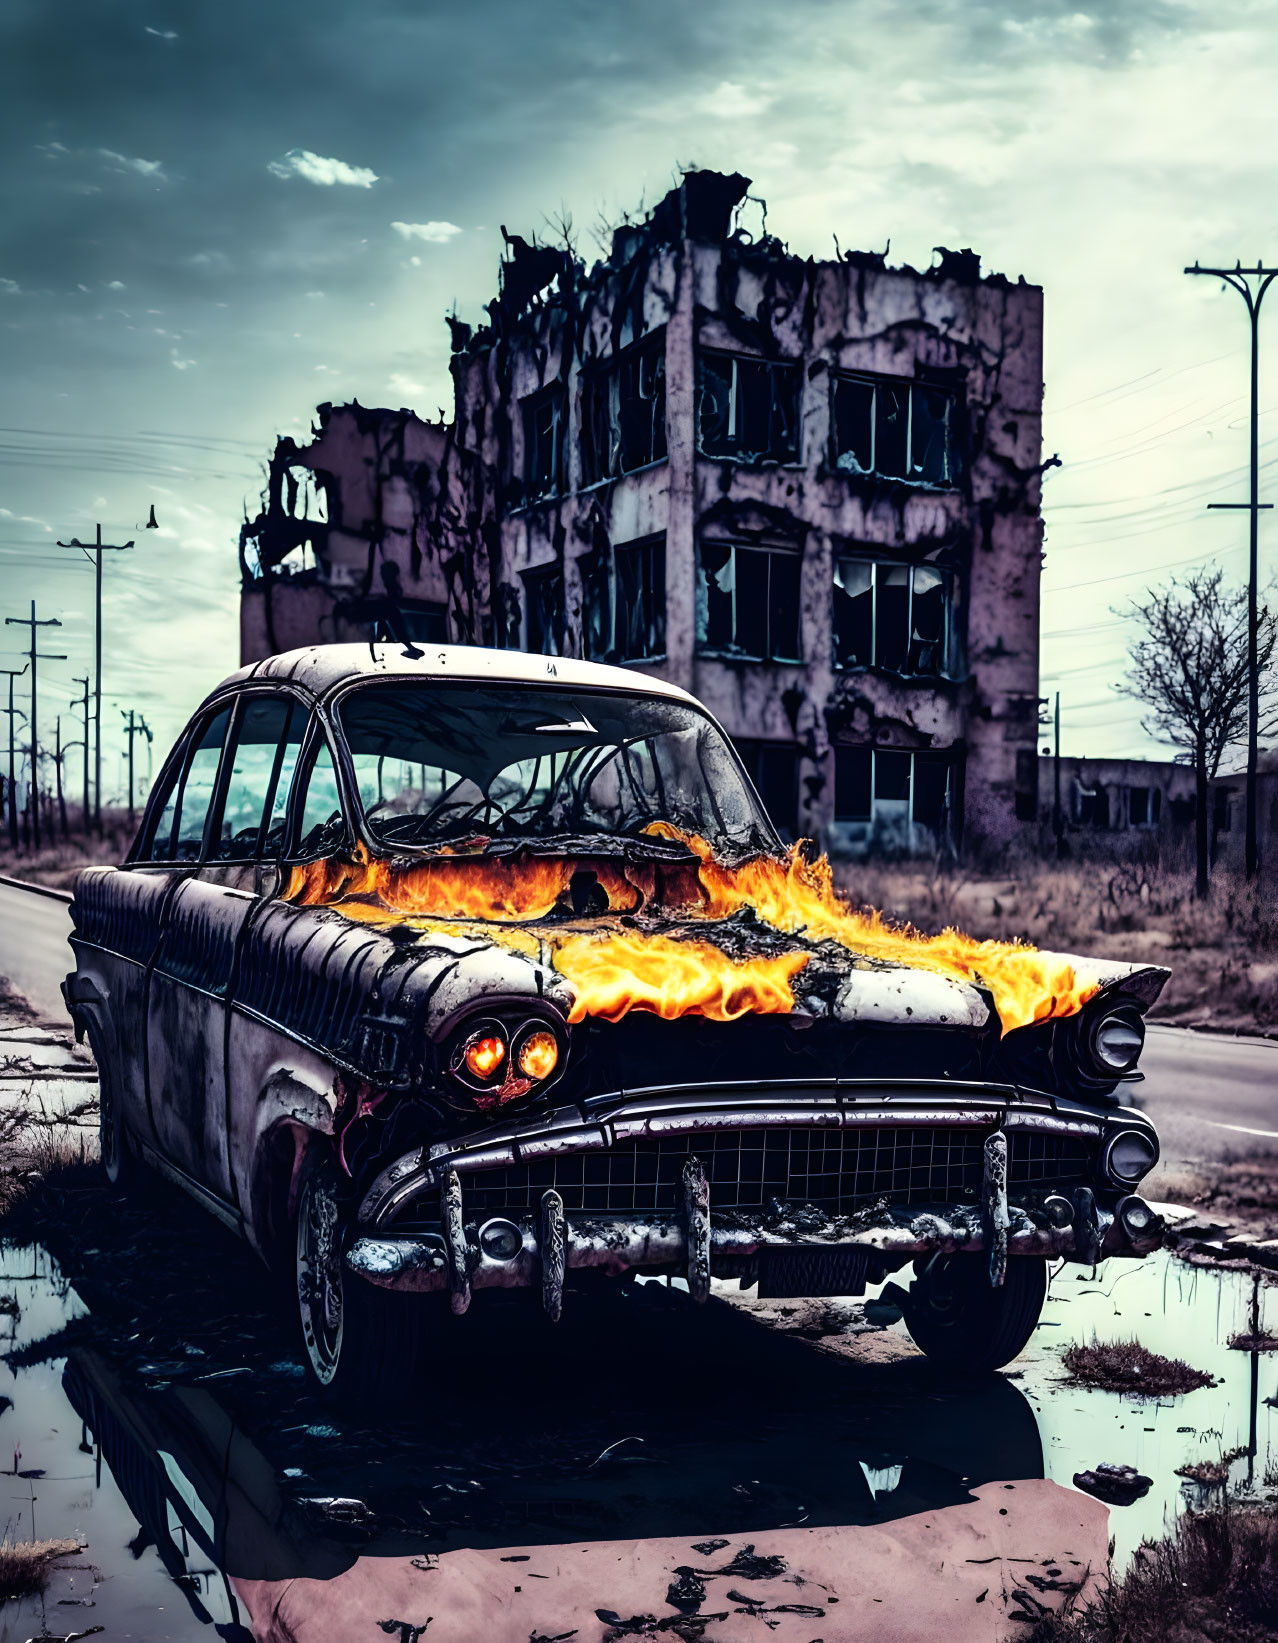 Vintage Car with Flames Parked on Desolate Road